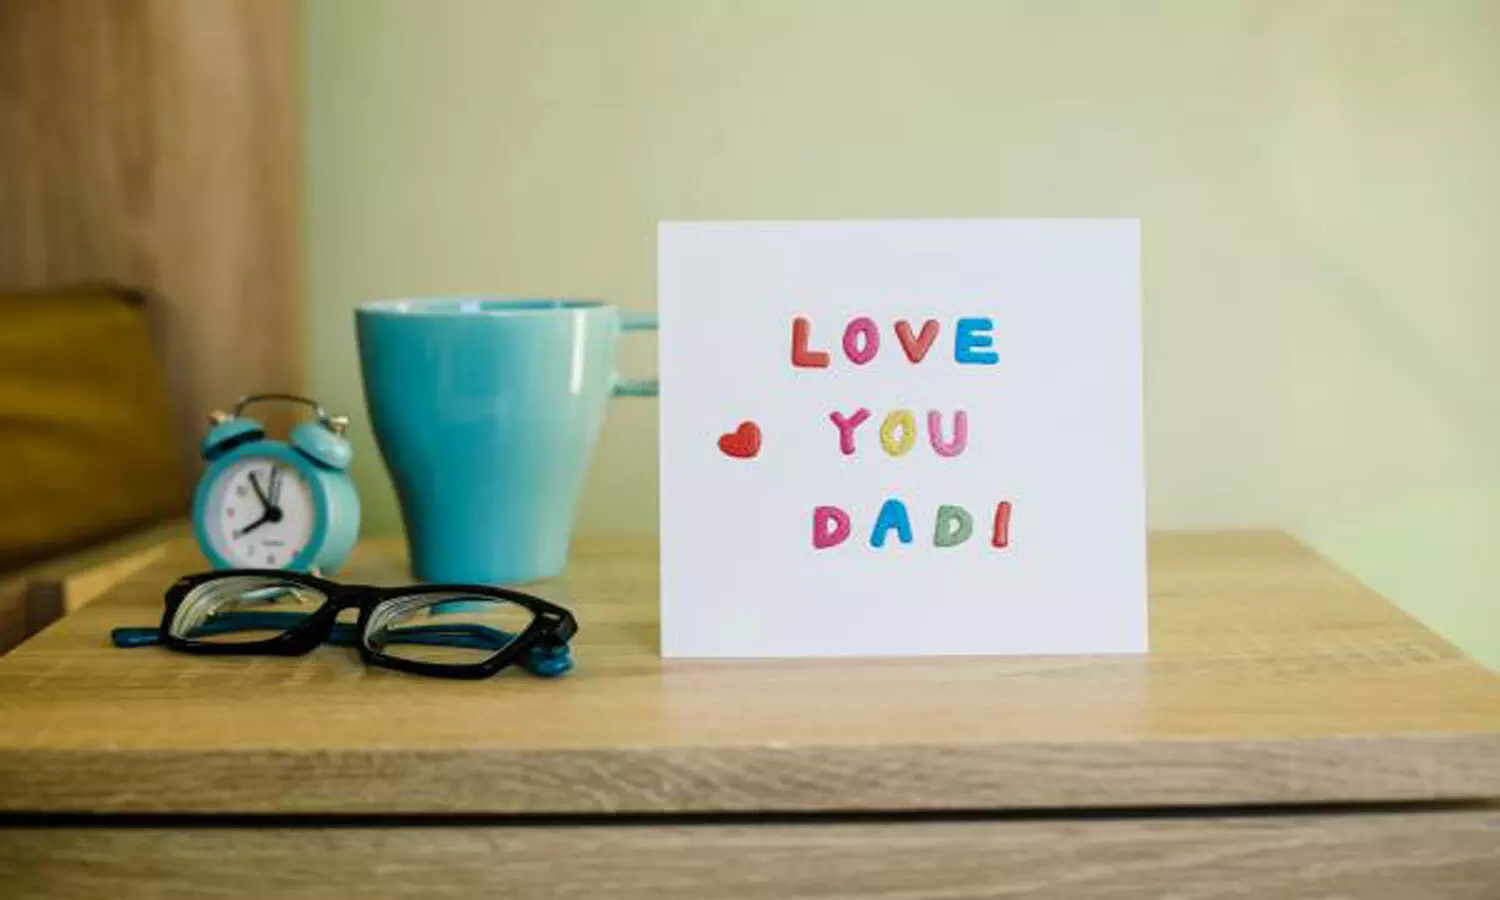 THIS Fathers Day make your dad feel special with these thoughtful gift items